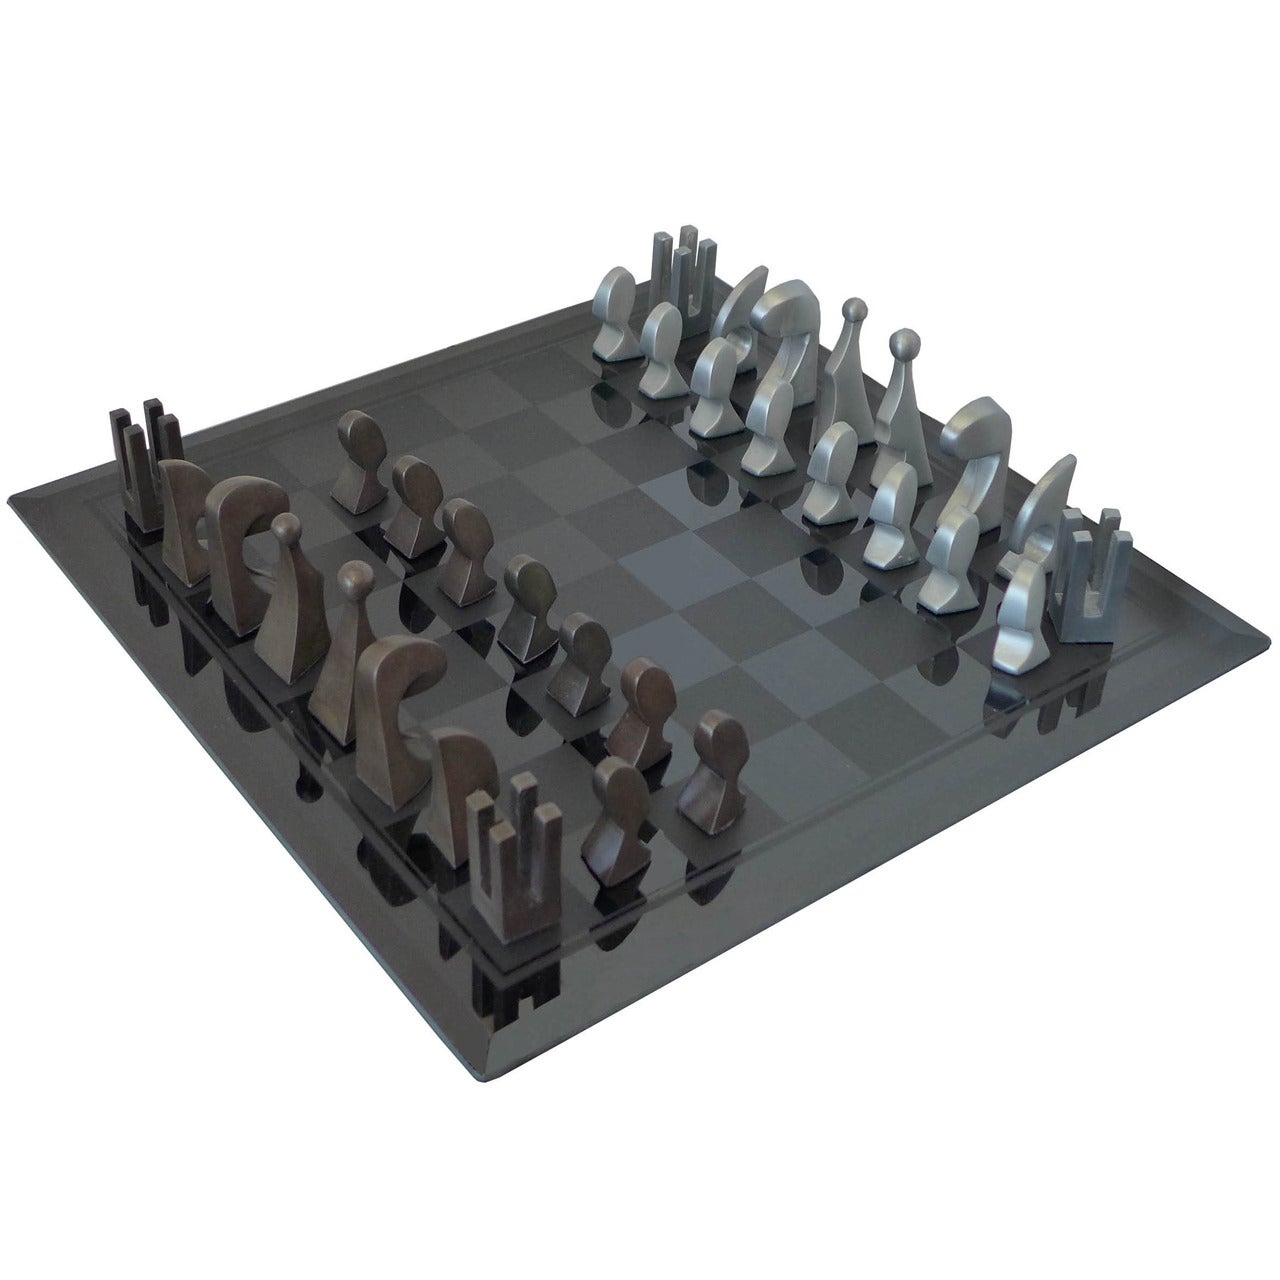 Pierre Cardin, 1969 Evolution Chess Set with Glass Board For Sale